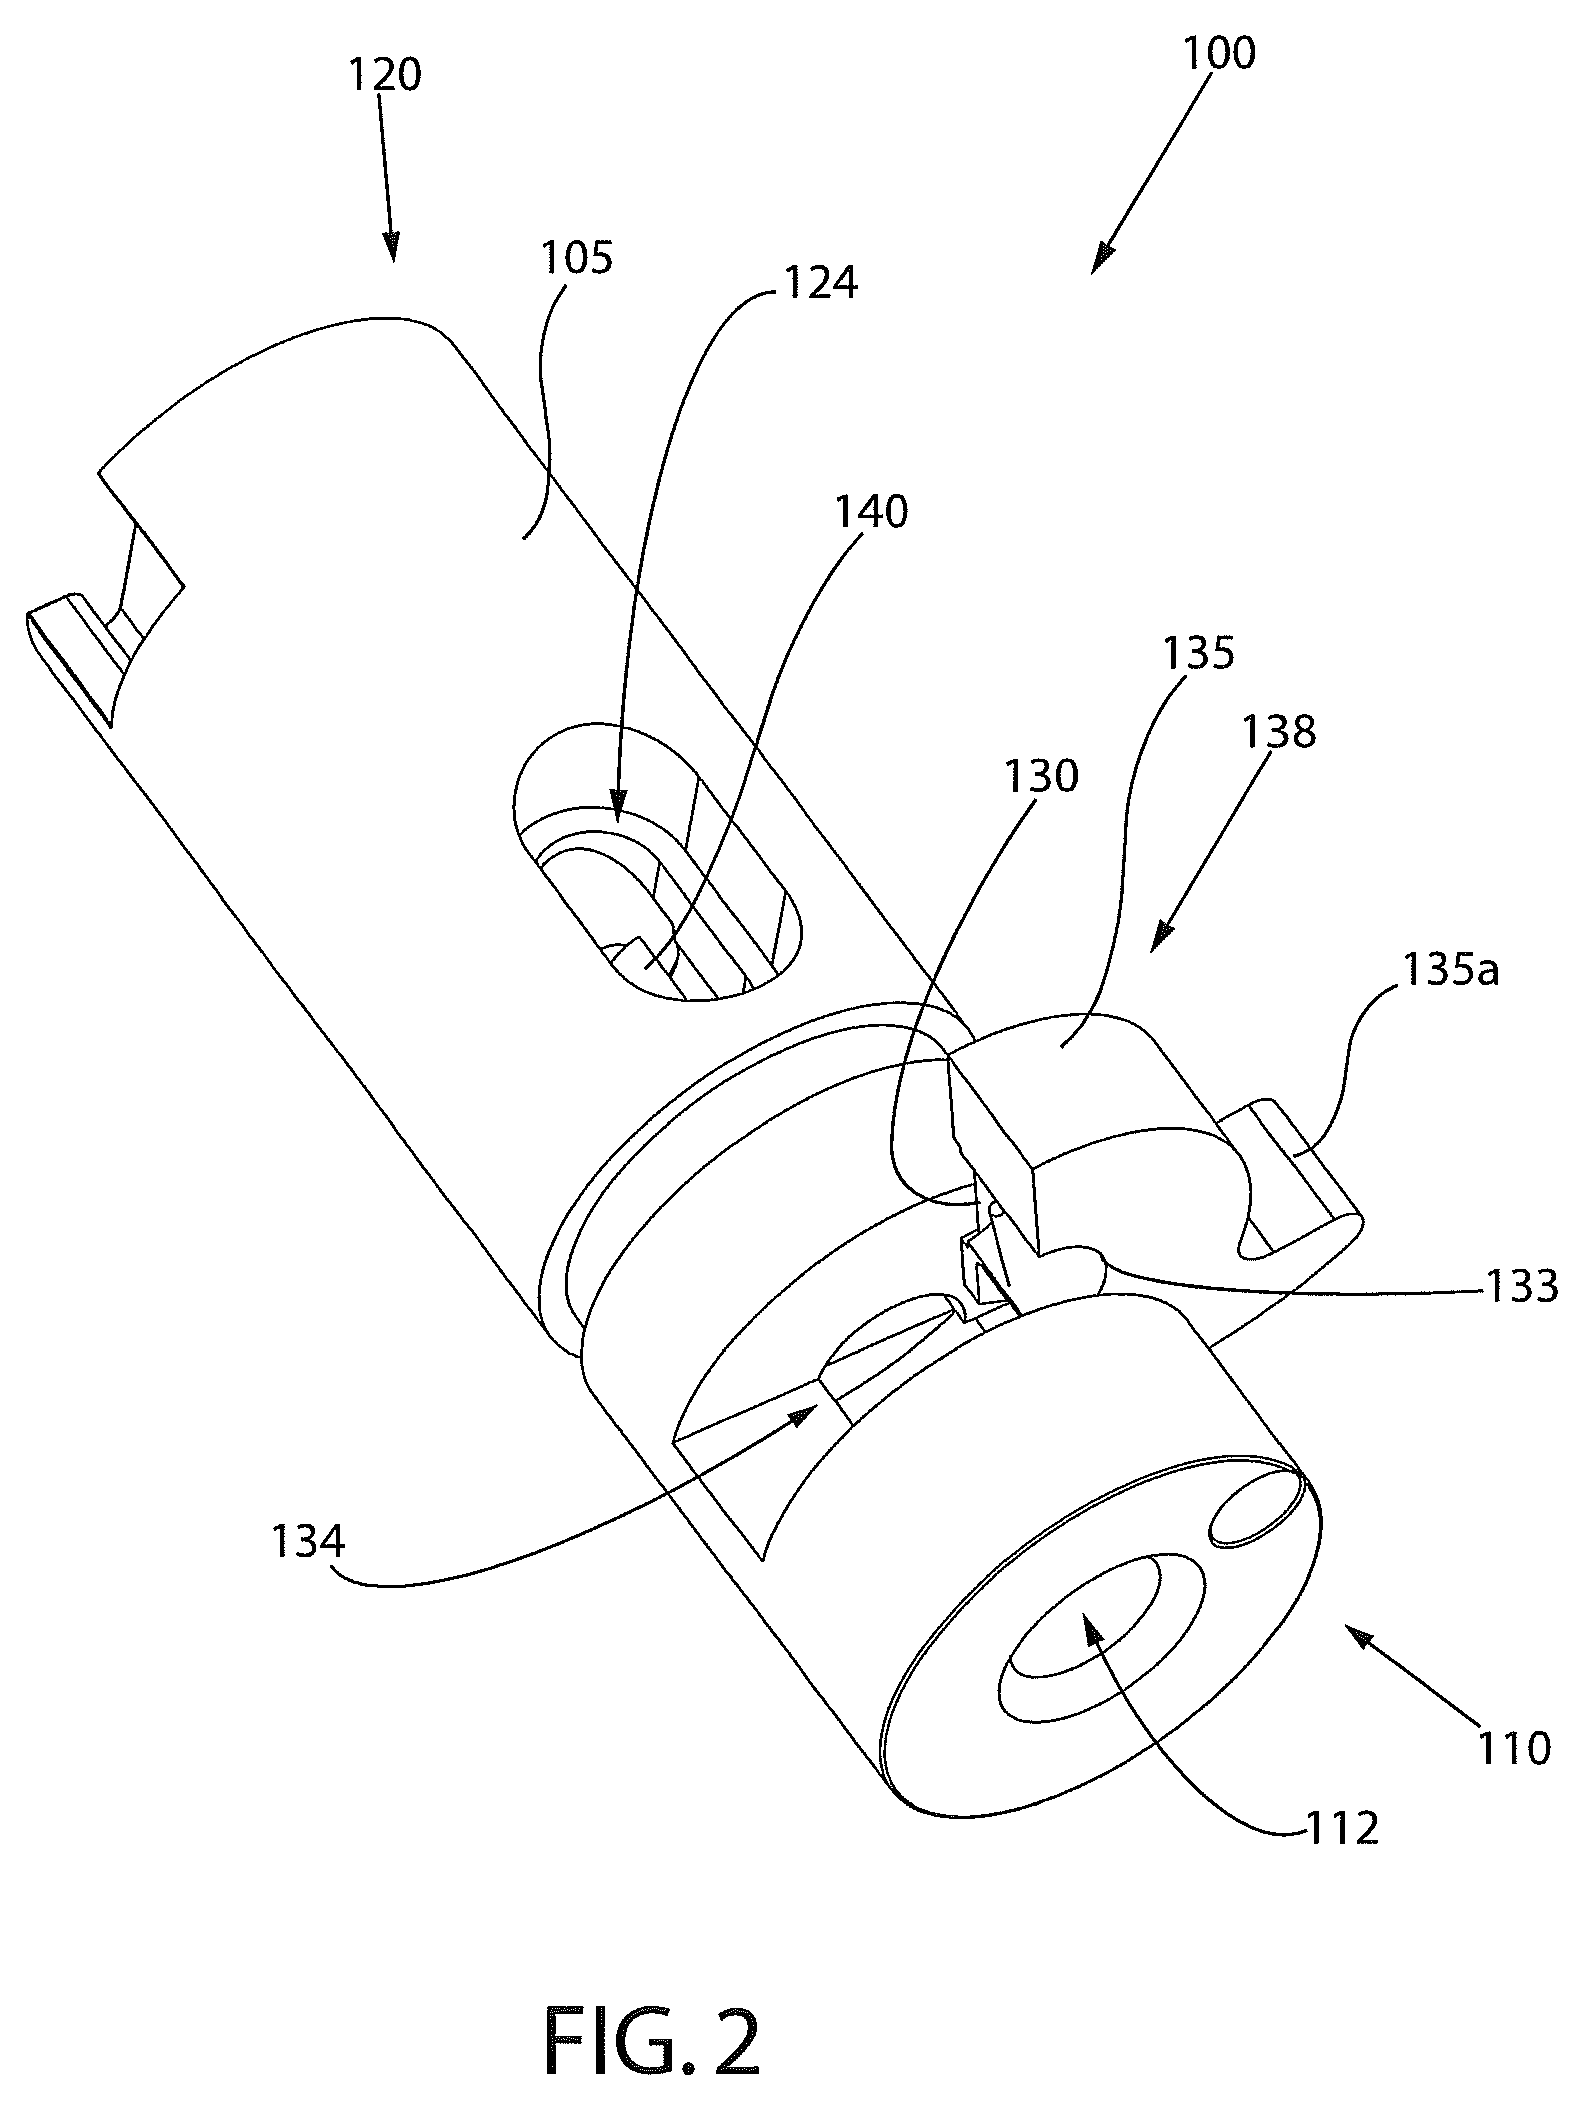 Coaxial cable preparation tool and method of use thereof